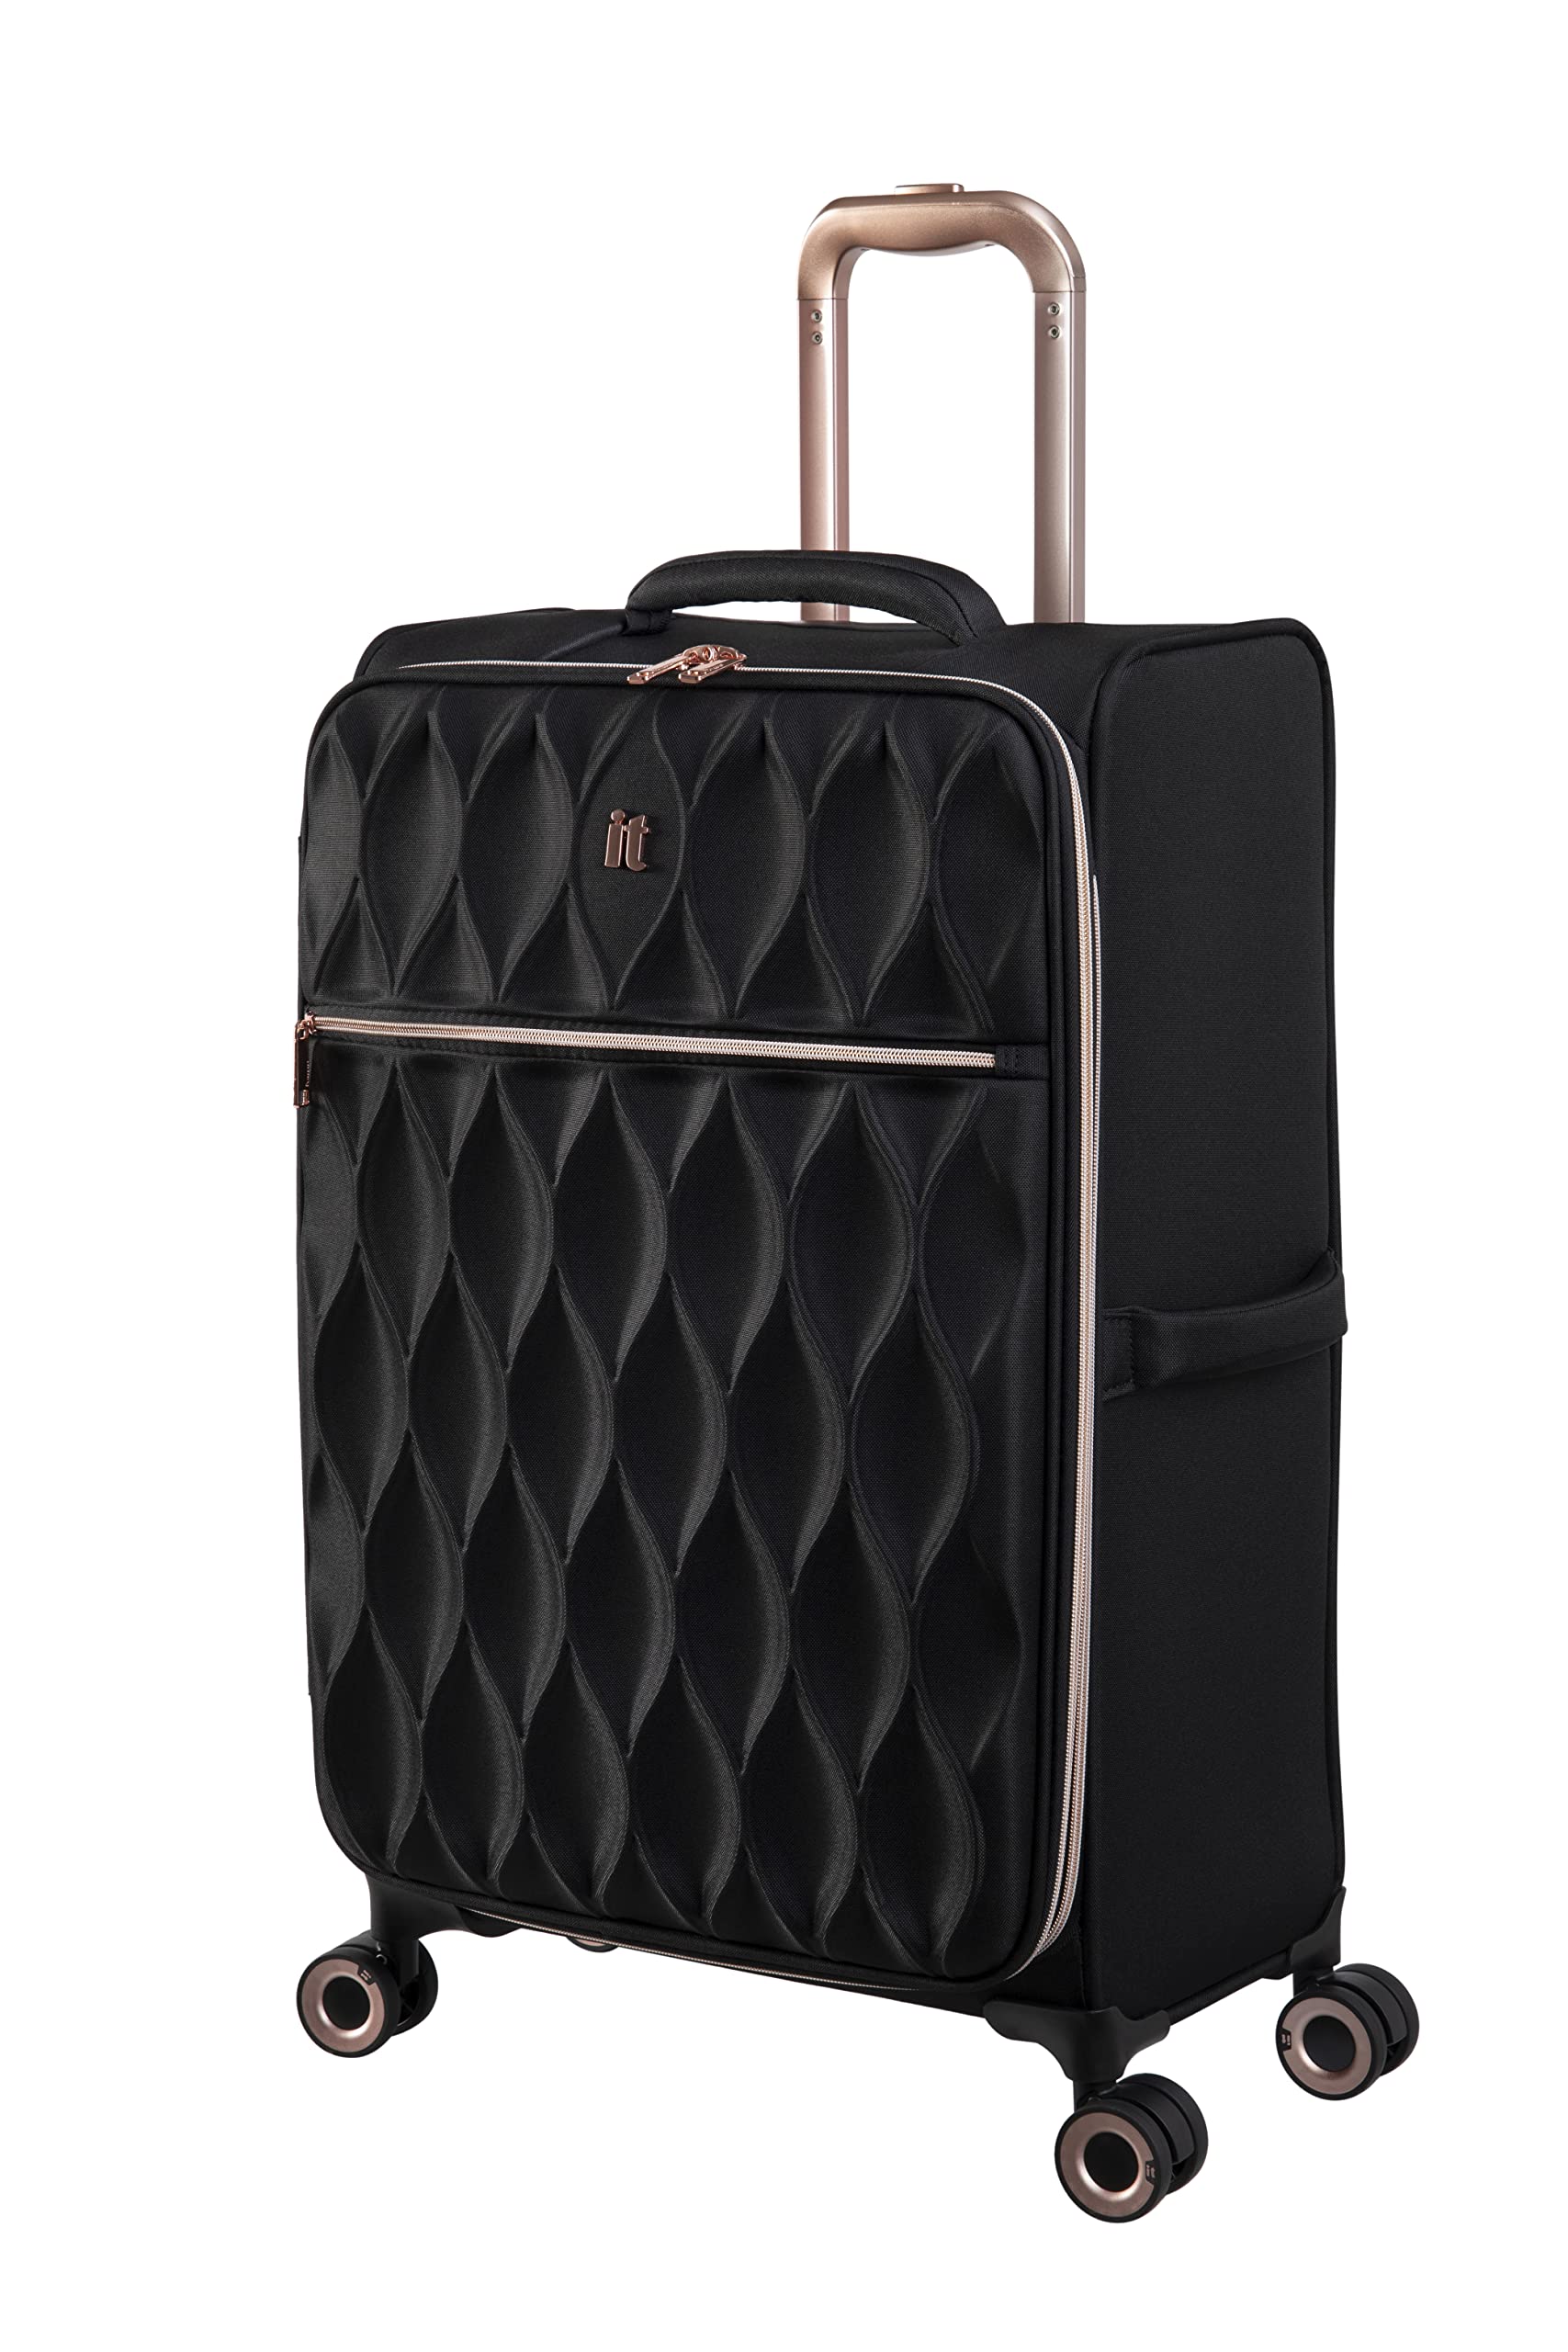 it luggage Enliven 27 Softside checked 8 Wheel Expander Spinner, Black